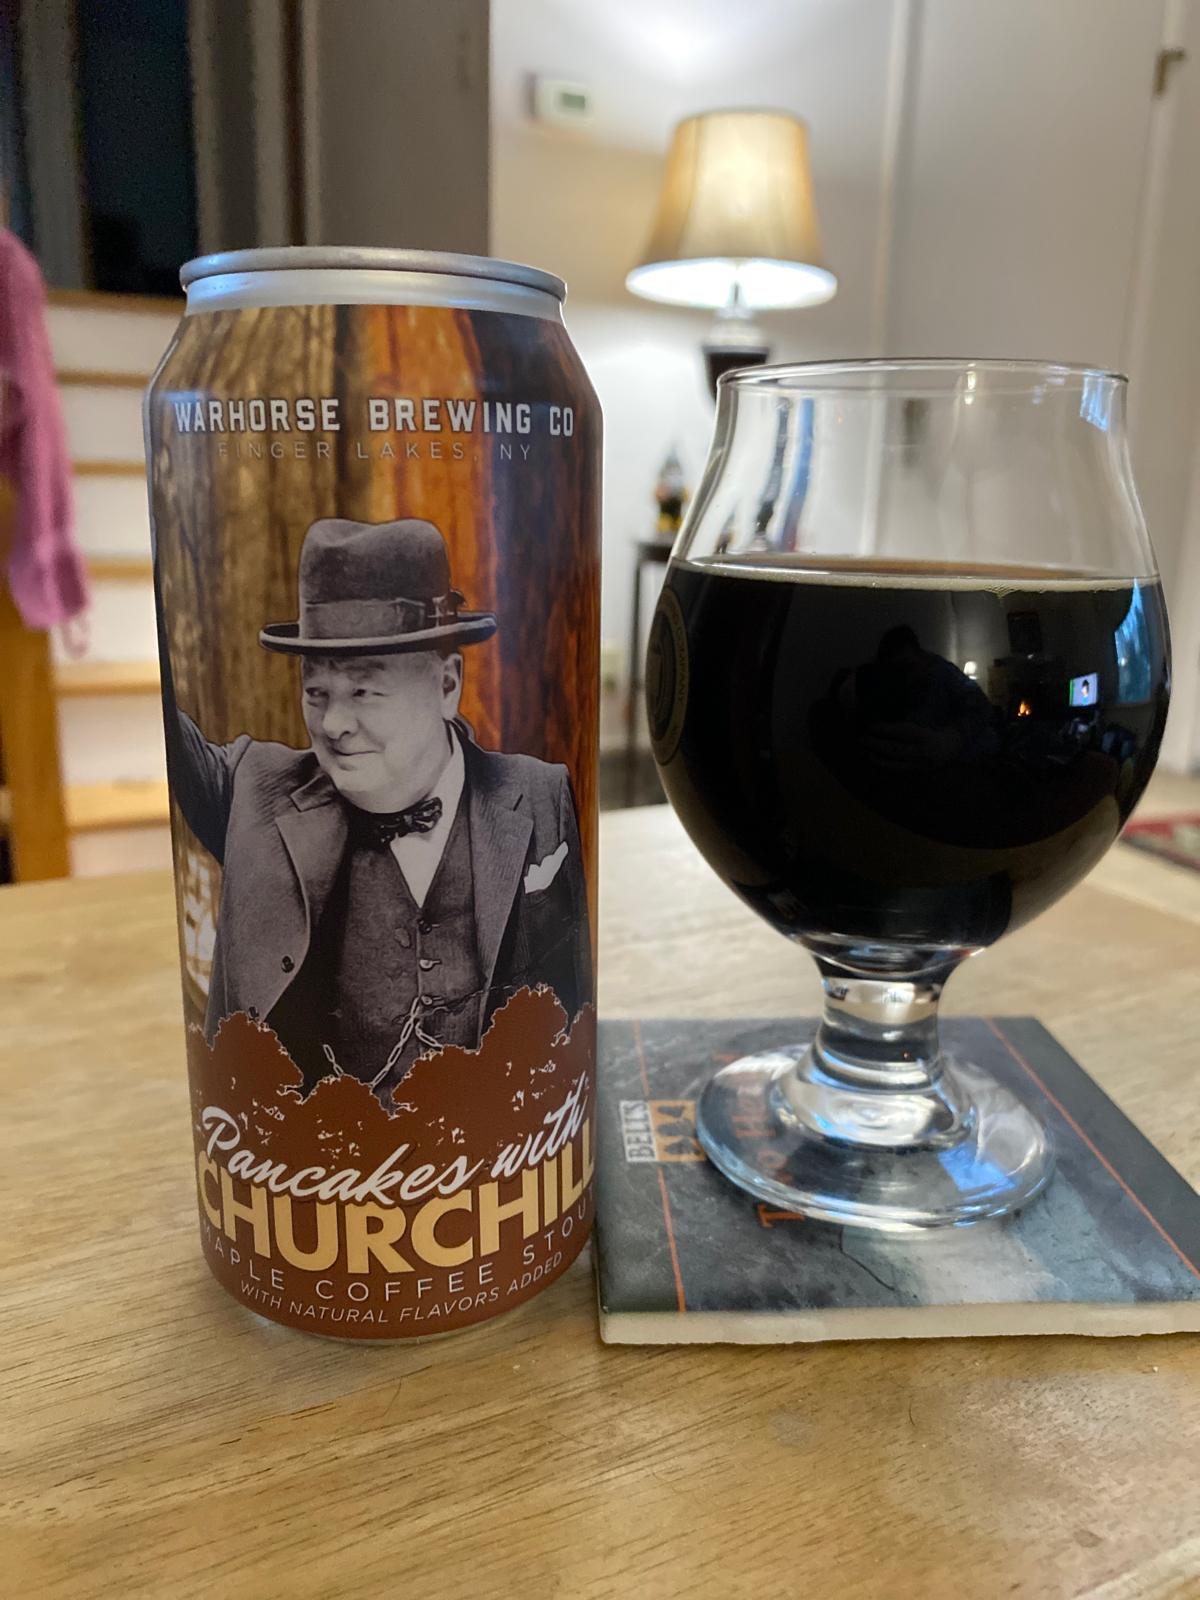 Pancakes With Churchill